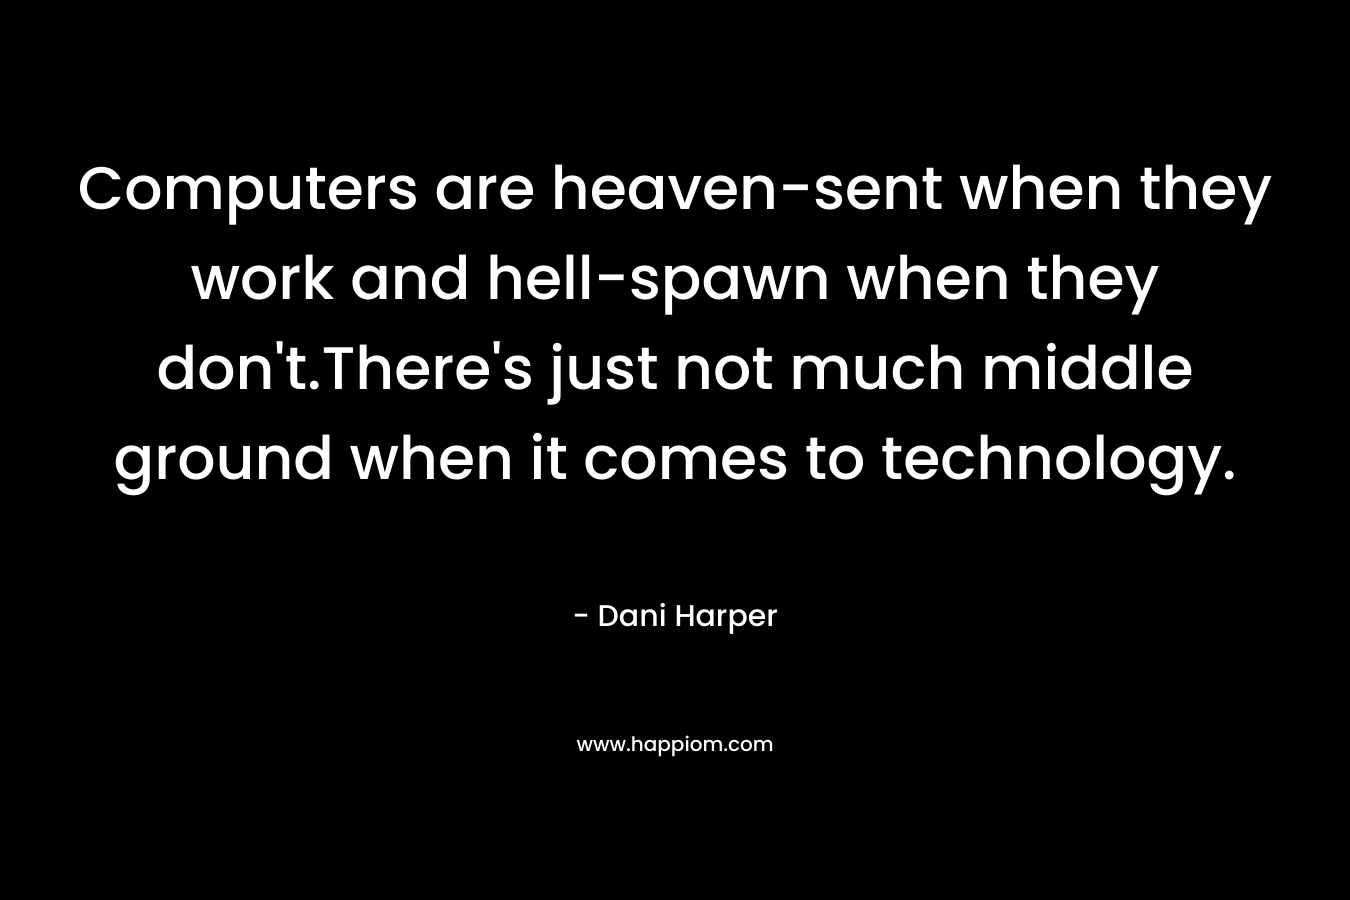 Computers are heaven-sent when they work and hell-spawn when they don't.There's just not much middle ground when it comes to technology.